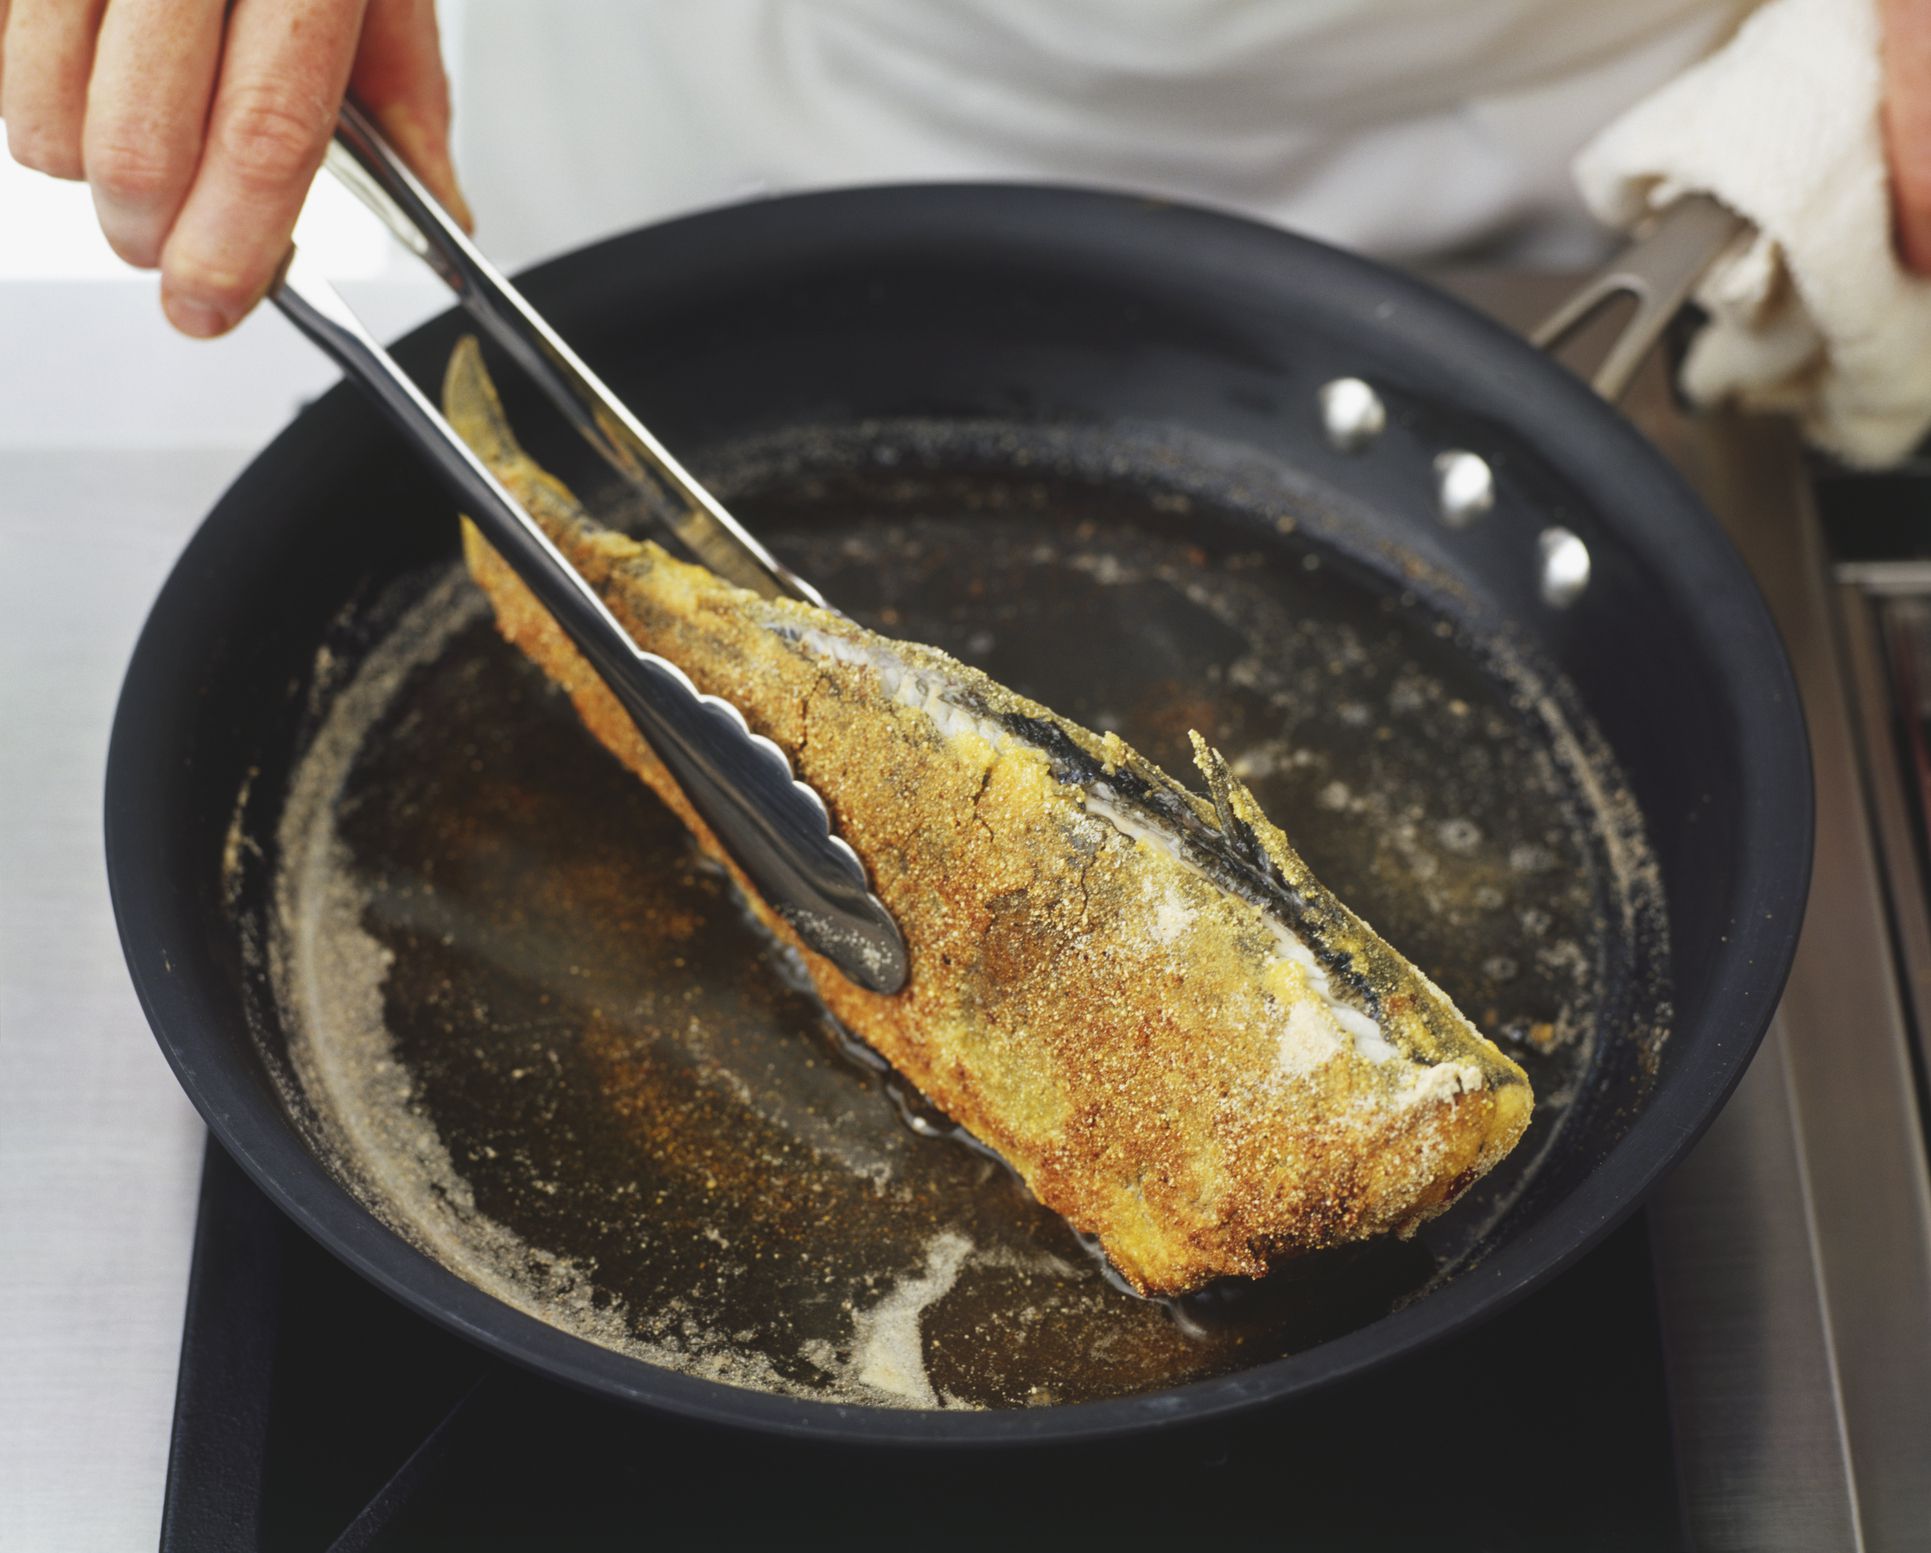 Choosing the Best Oils to Cook Fish